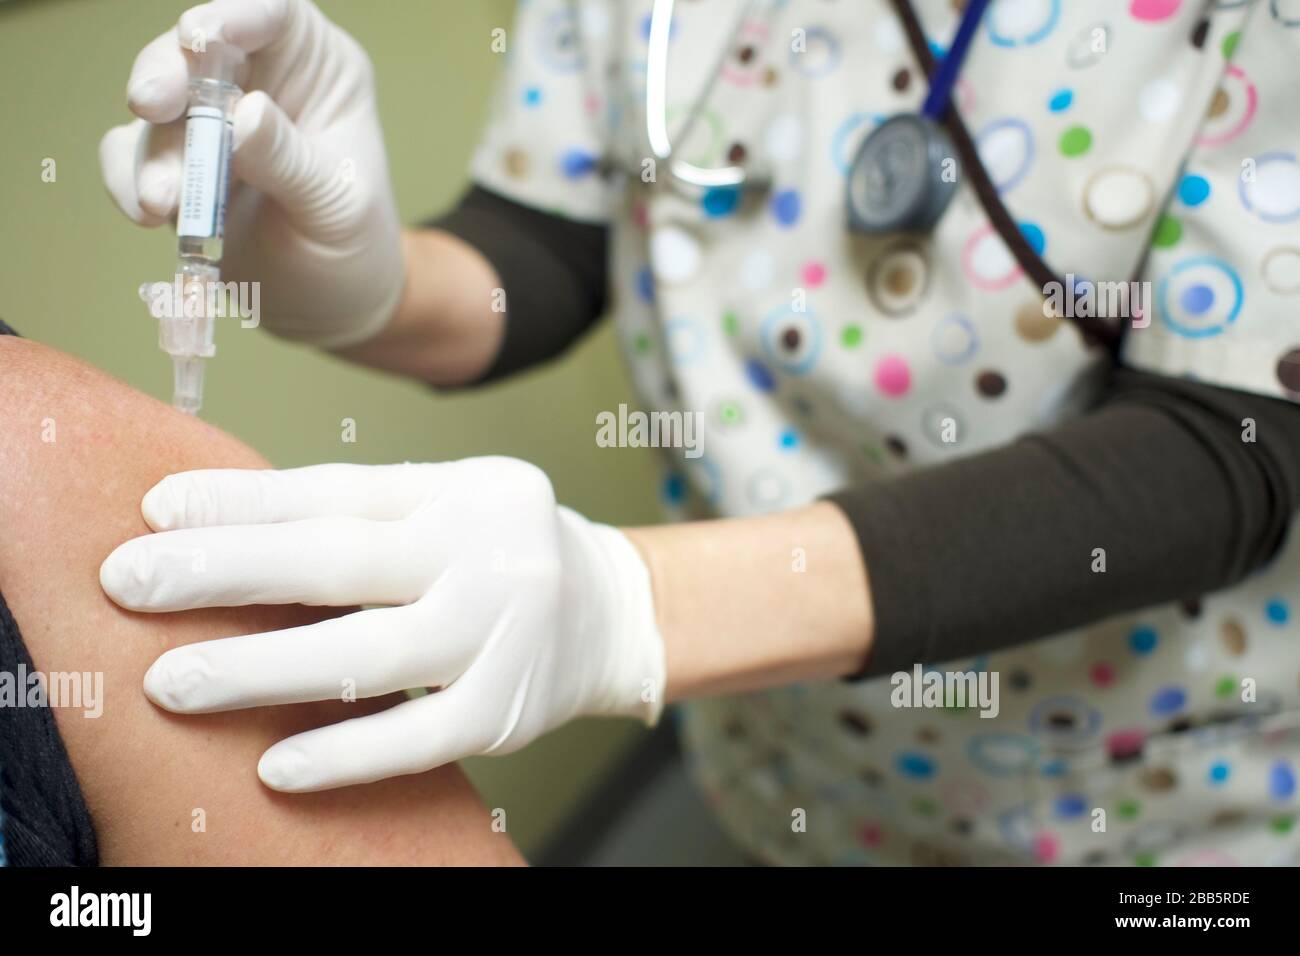 Nurse giving patient a vaccine in the bicep. Gloved hand, surgical scrubs injecting hypodermic needle into patient. Covid-19, Coronavirus protection. Stock Photo